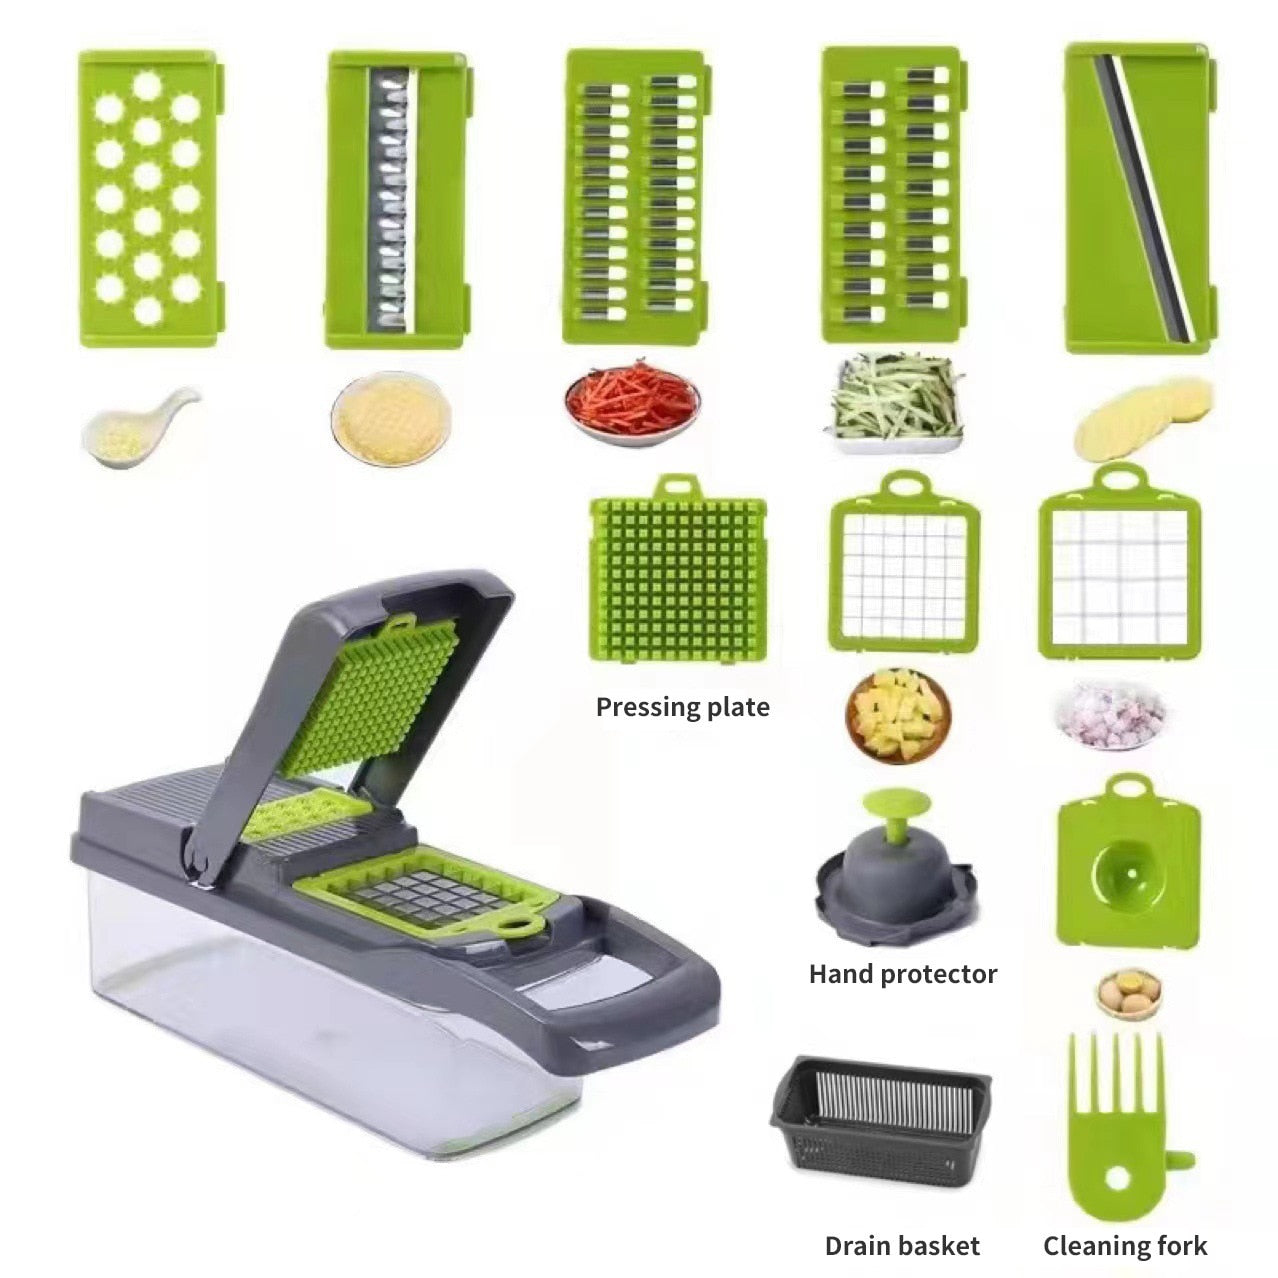 Multifunctional Vegetable & Fruit Cutter and Grater